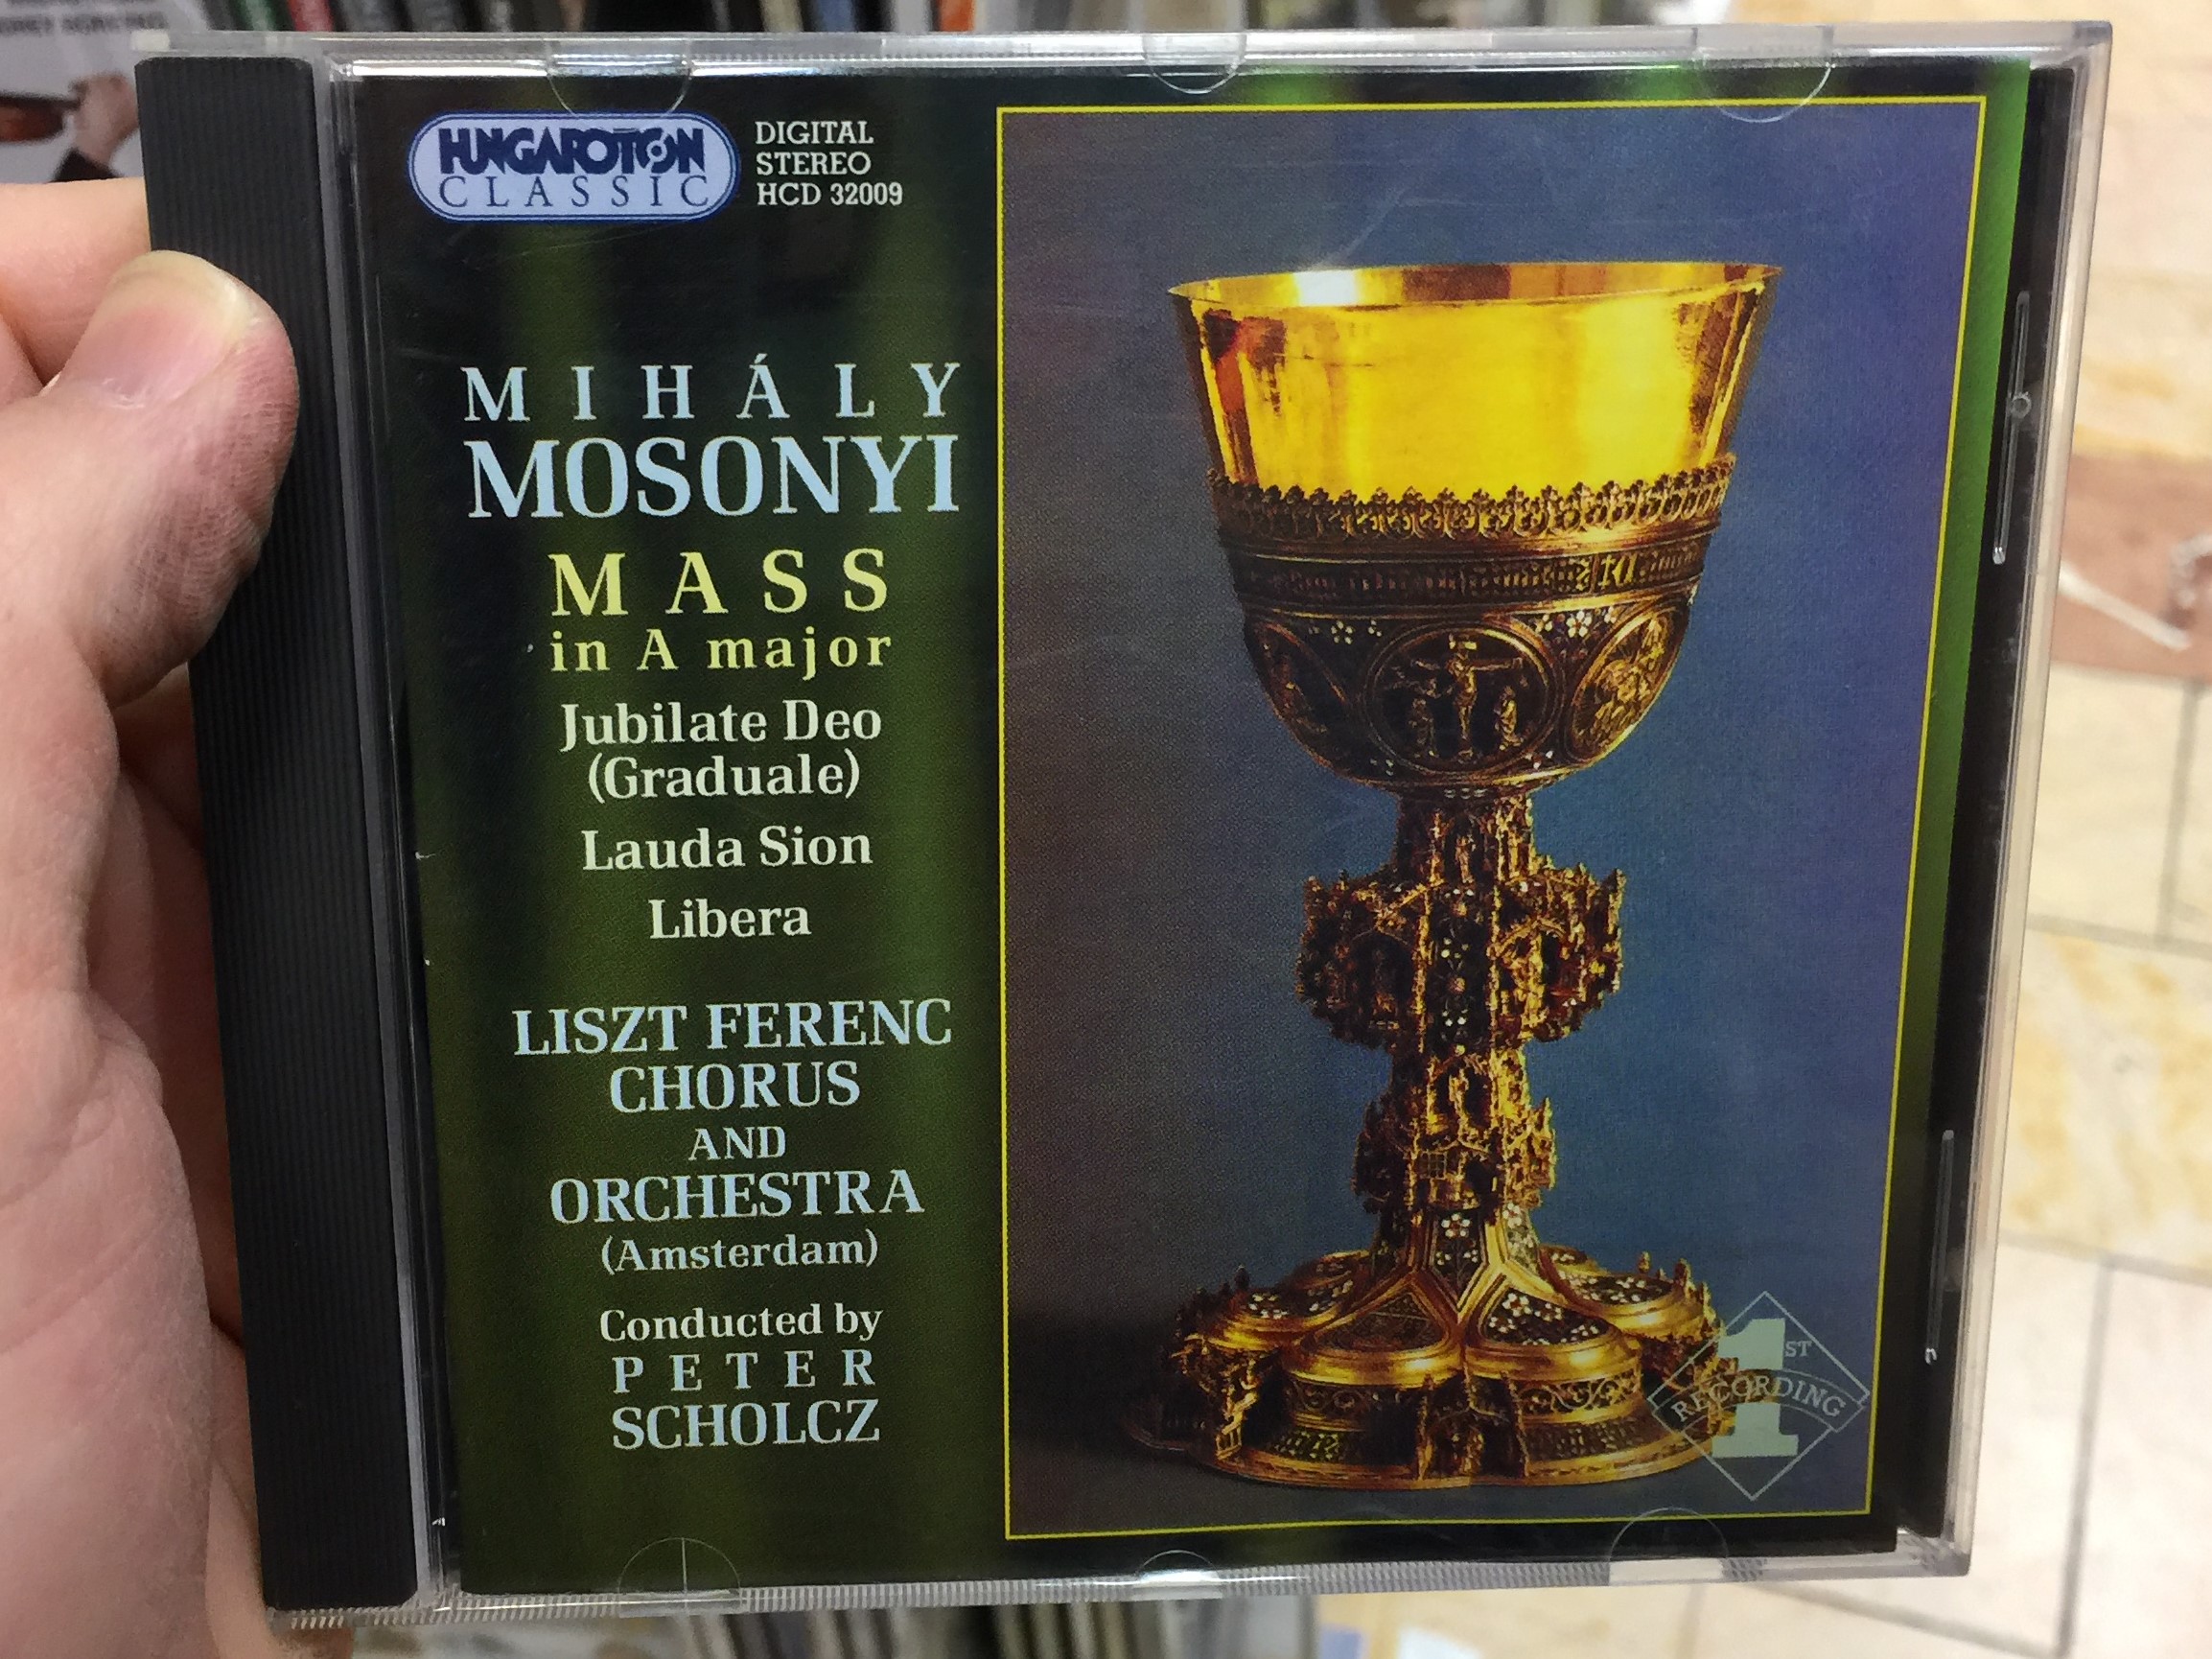 mih-ly-mosonyi-mass-in-major-jubilate-deo-graduale-lauda-sion-libera-liszt-ferenc-chorus-and-orchestra-amsterdam-conducted-by-peter-scholcz-hungaroton-classic-audio-cd-2001-stereo-h-1-.jpg